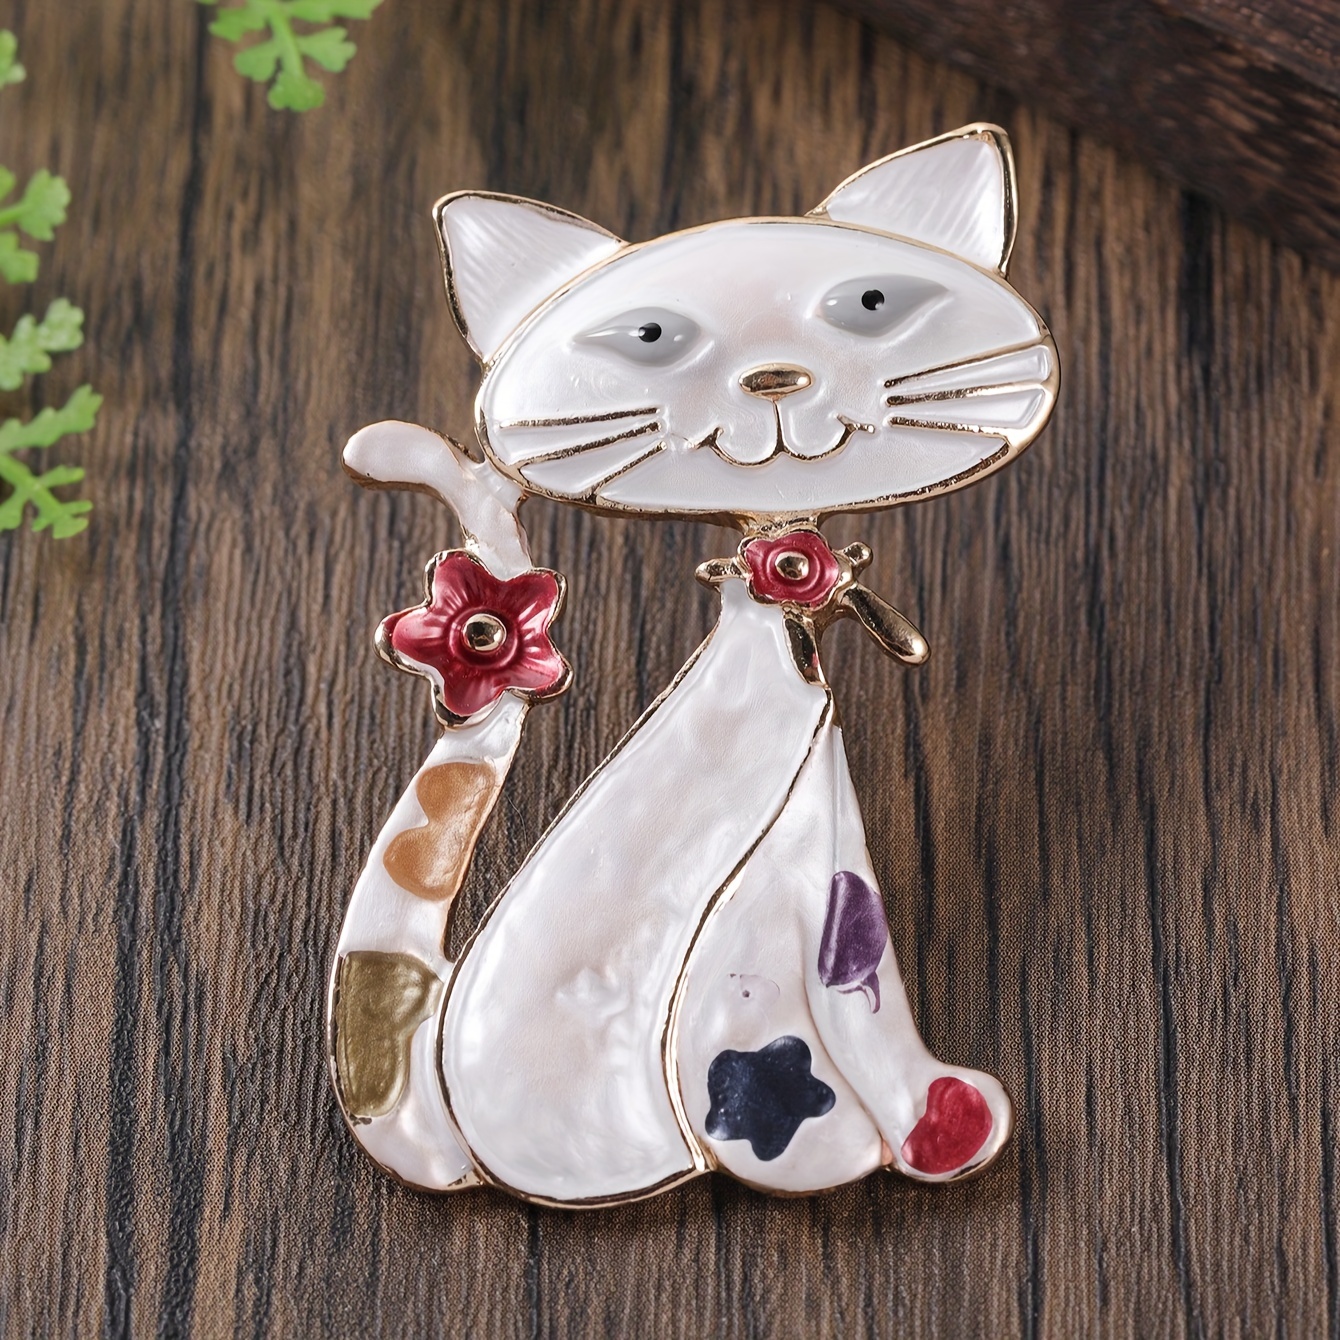 Blucome Enamal Animal Brooches Cute Cat with Flower Shape Corsage Suit Bag  Scarf Hat Pins for Women Kids Clothes Accessories